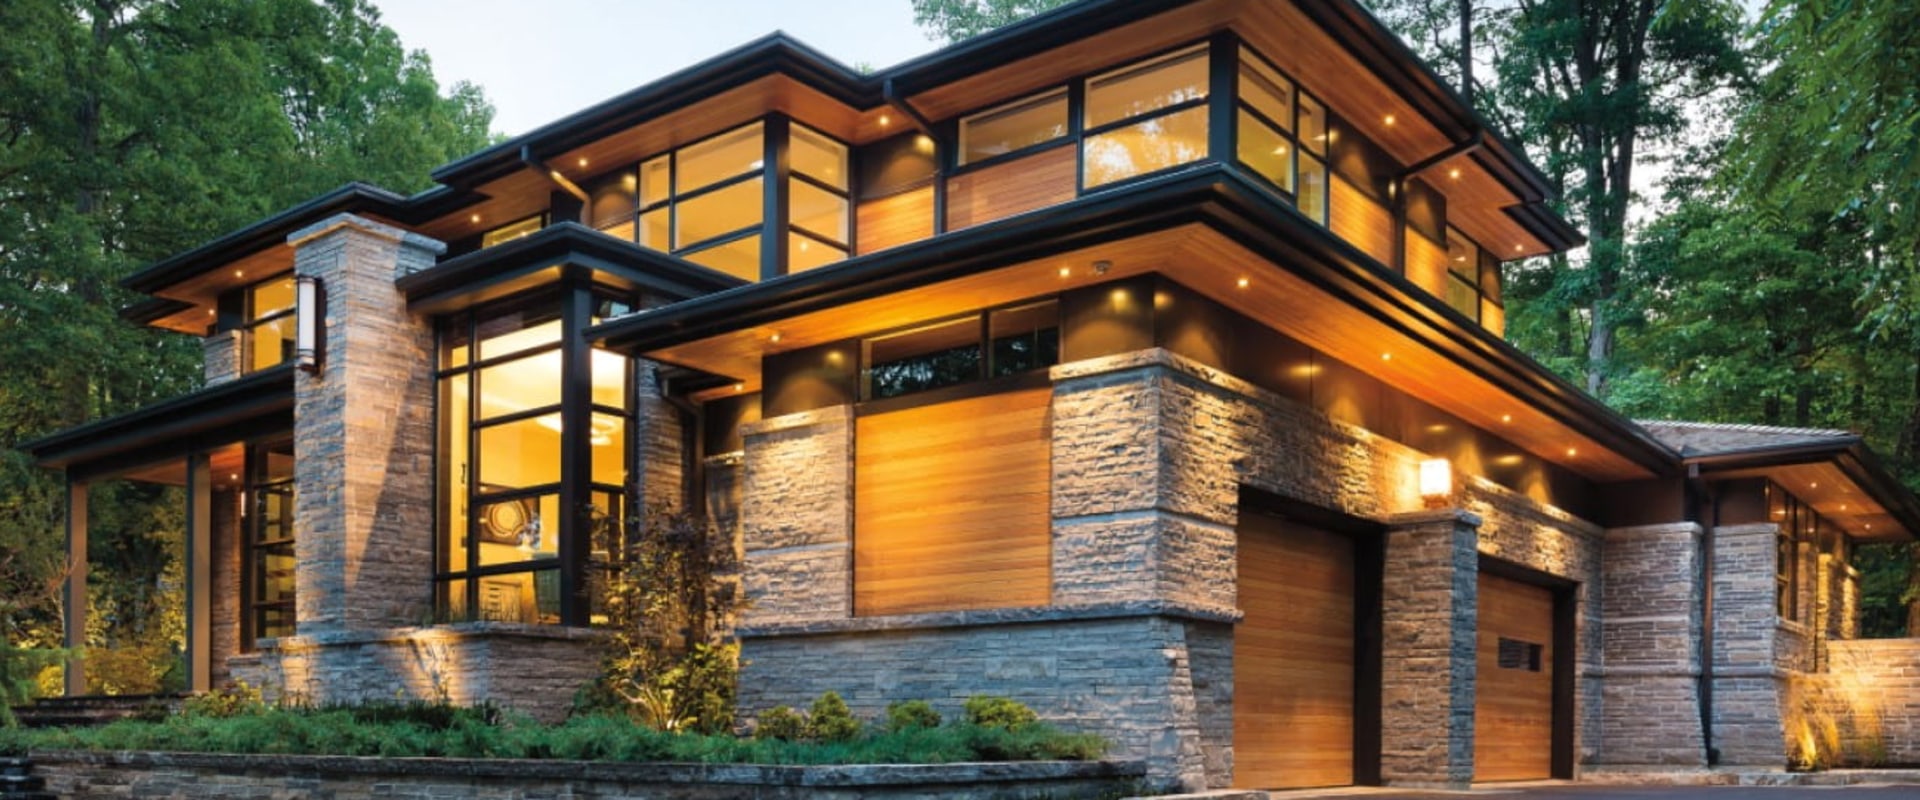 How Glazing Panel Customization Can Make Your Home Stand Out On The Market